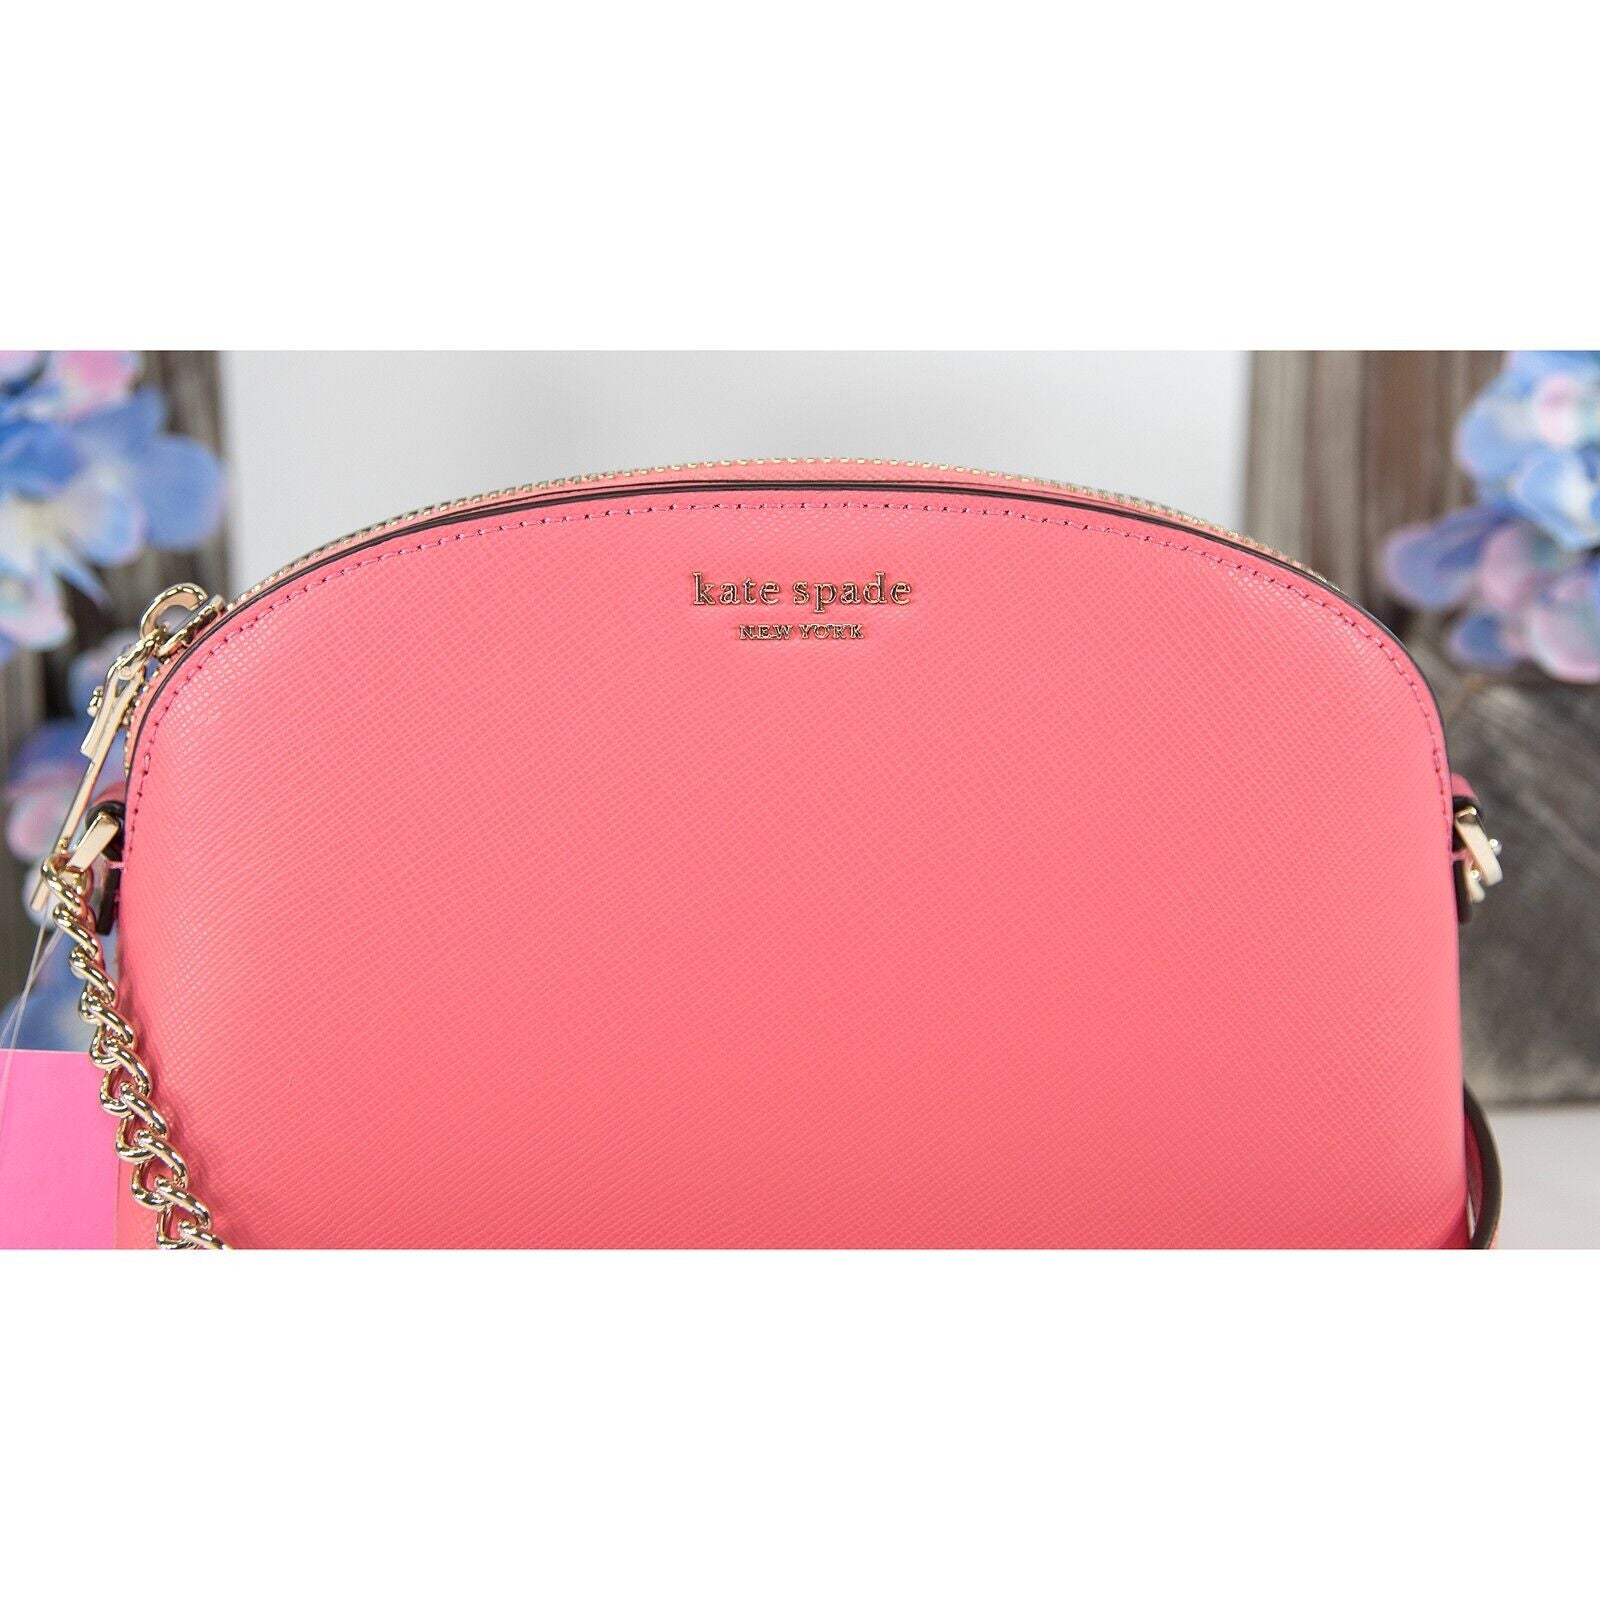 Kate Spade Light Pink Leather Small Dome Crossbody Purse Shimmer Pink Zip Top